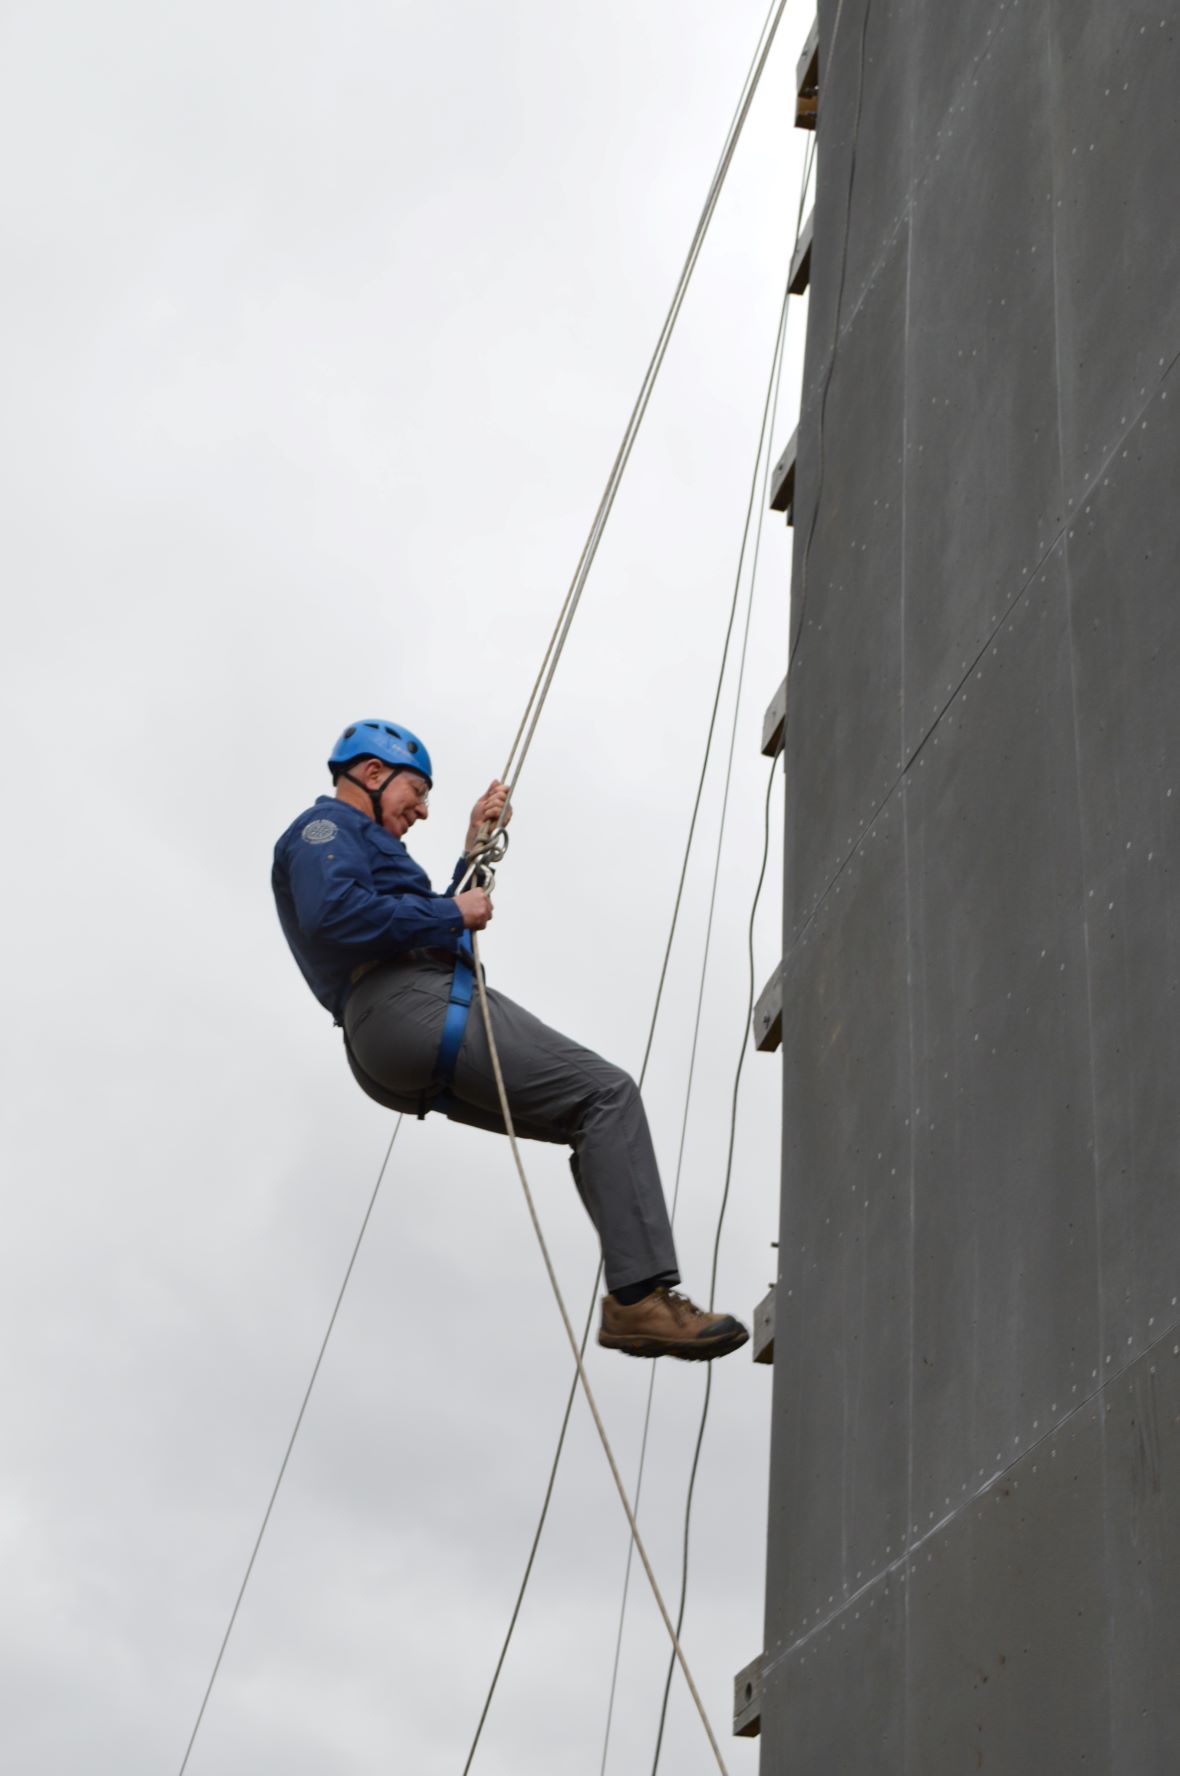 His Excellency The Governor General of Australia abseiling down a 10m tower at Outward Bound Australia.